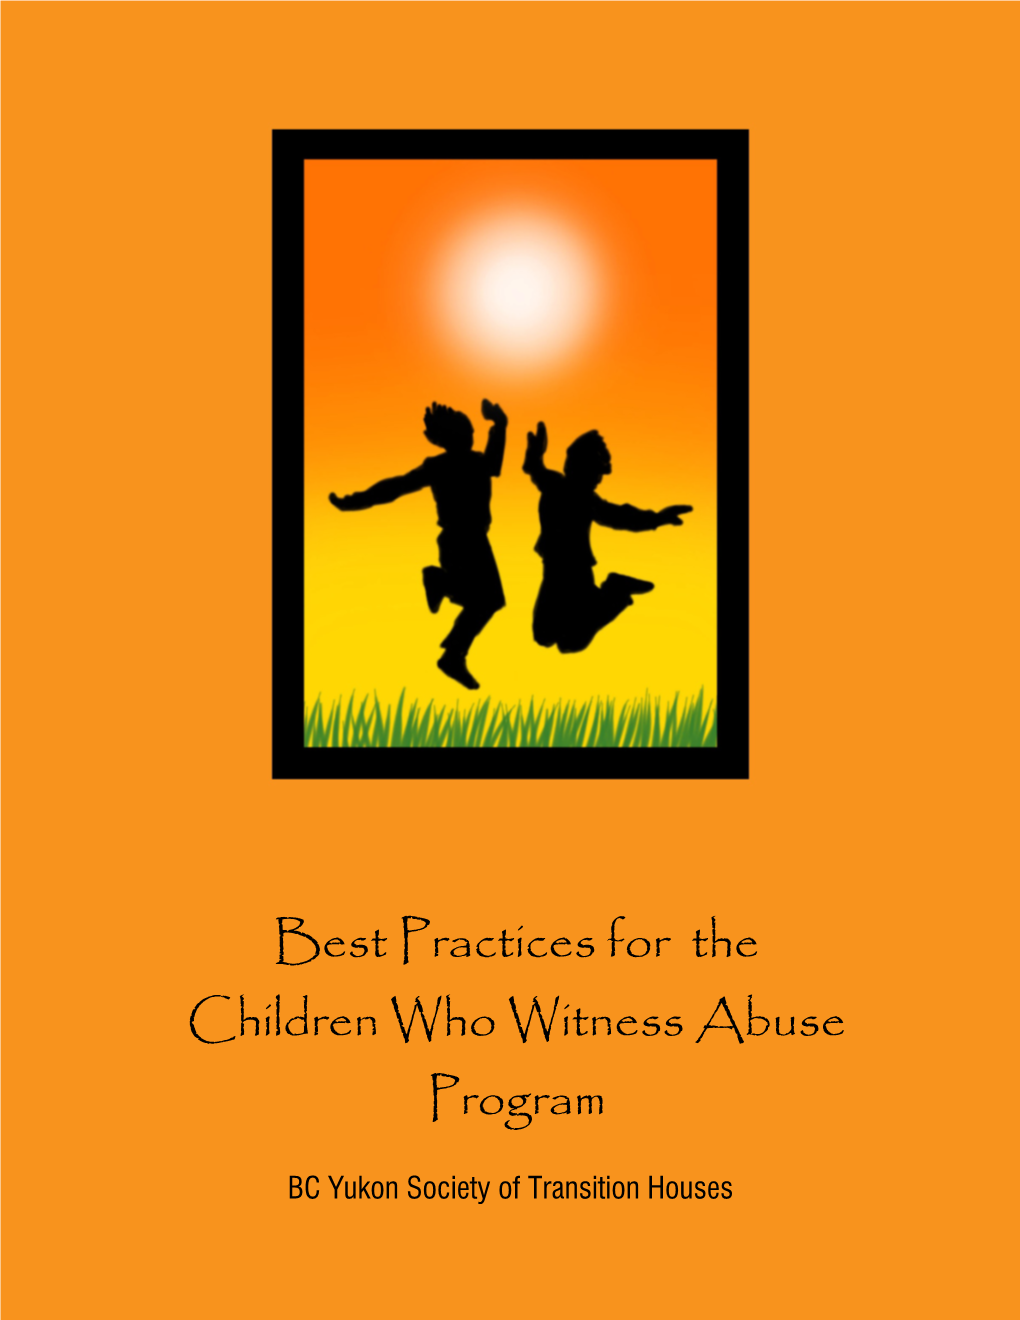 Best Practices for the Children Who Witness Abuse Program